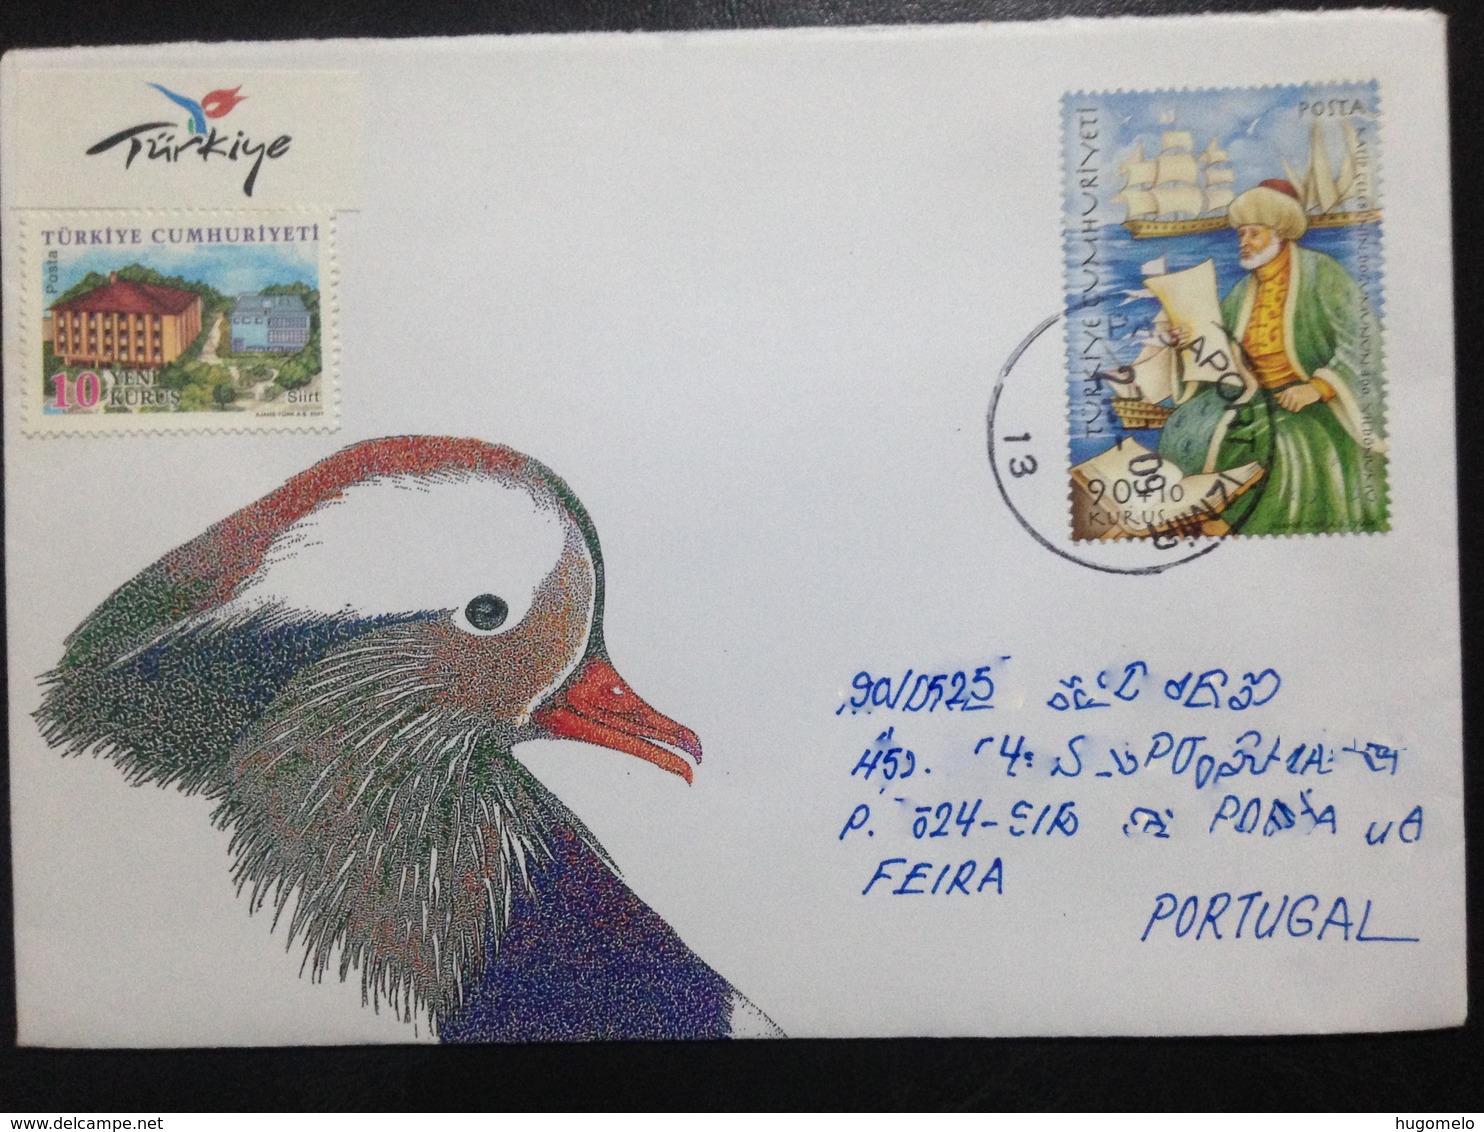 Turkey, Circulated Cover To Portugal,+, 2009 - Covers & Documents